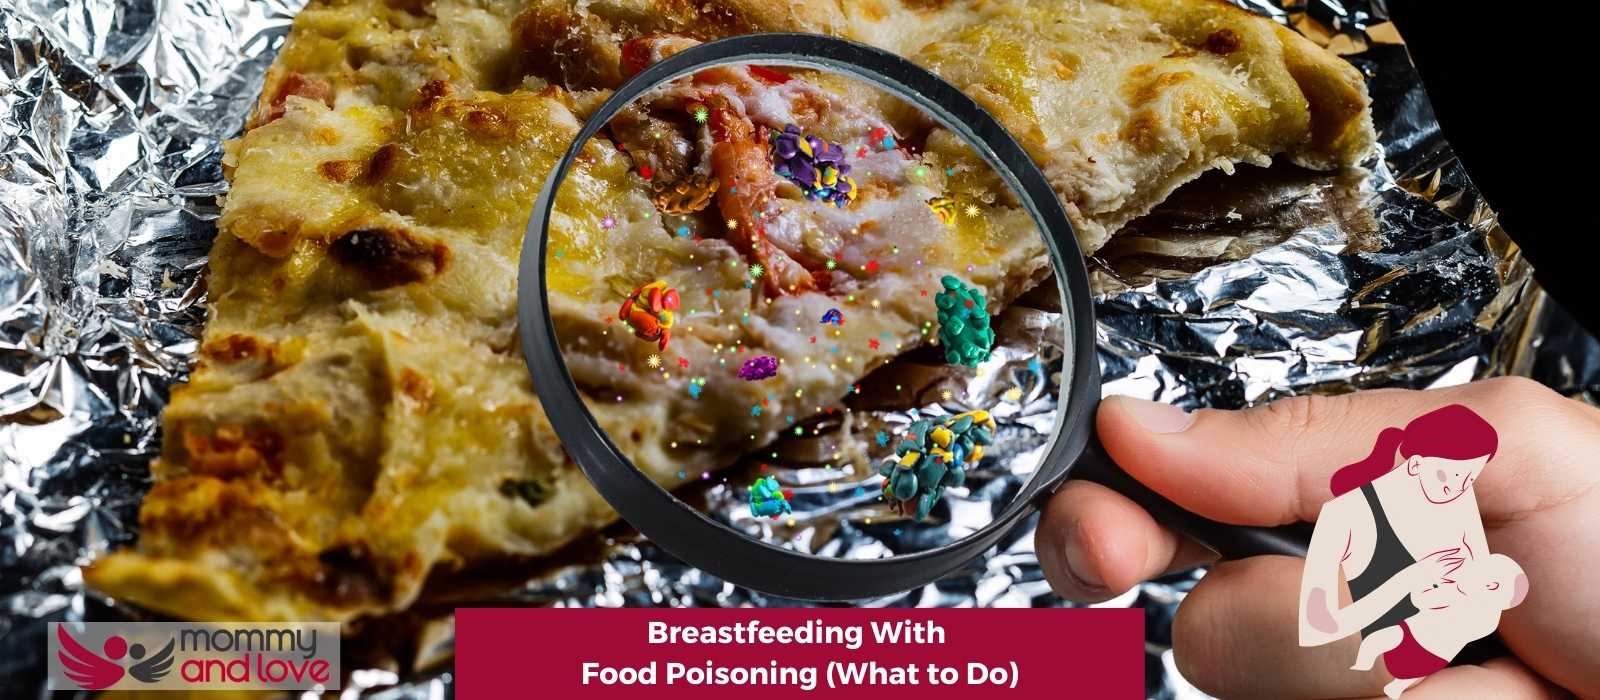 Breastfeeding With Food Poisoning (What to Do)